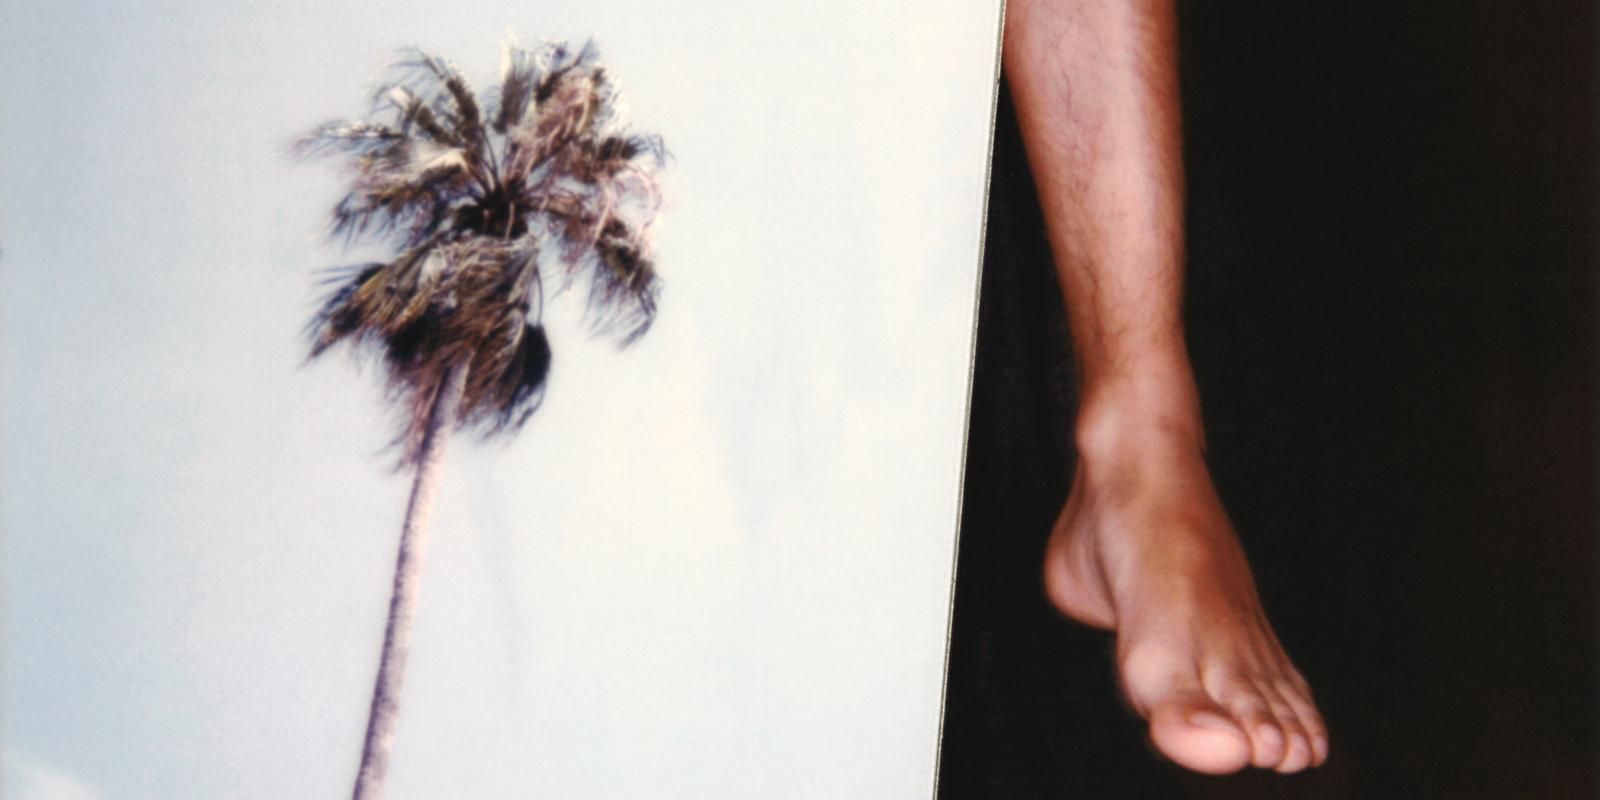 a polaroid photograph of a palm tree and a foot